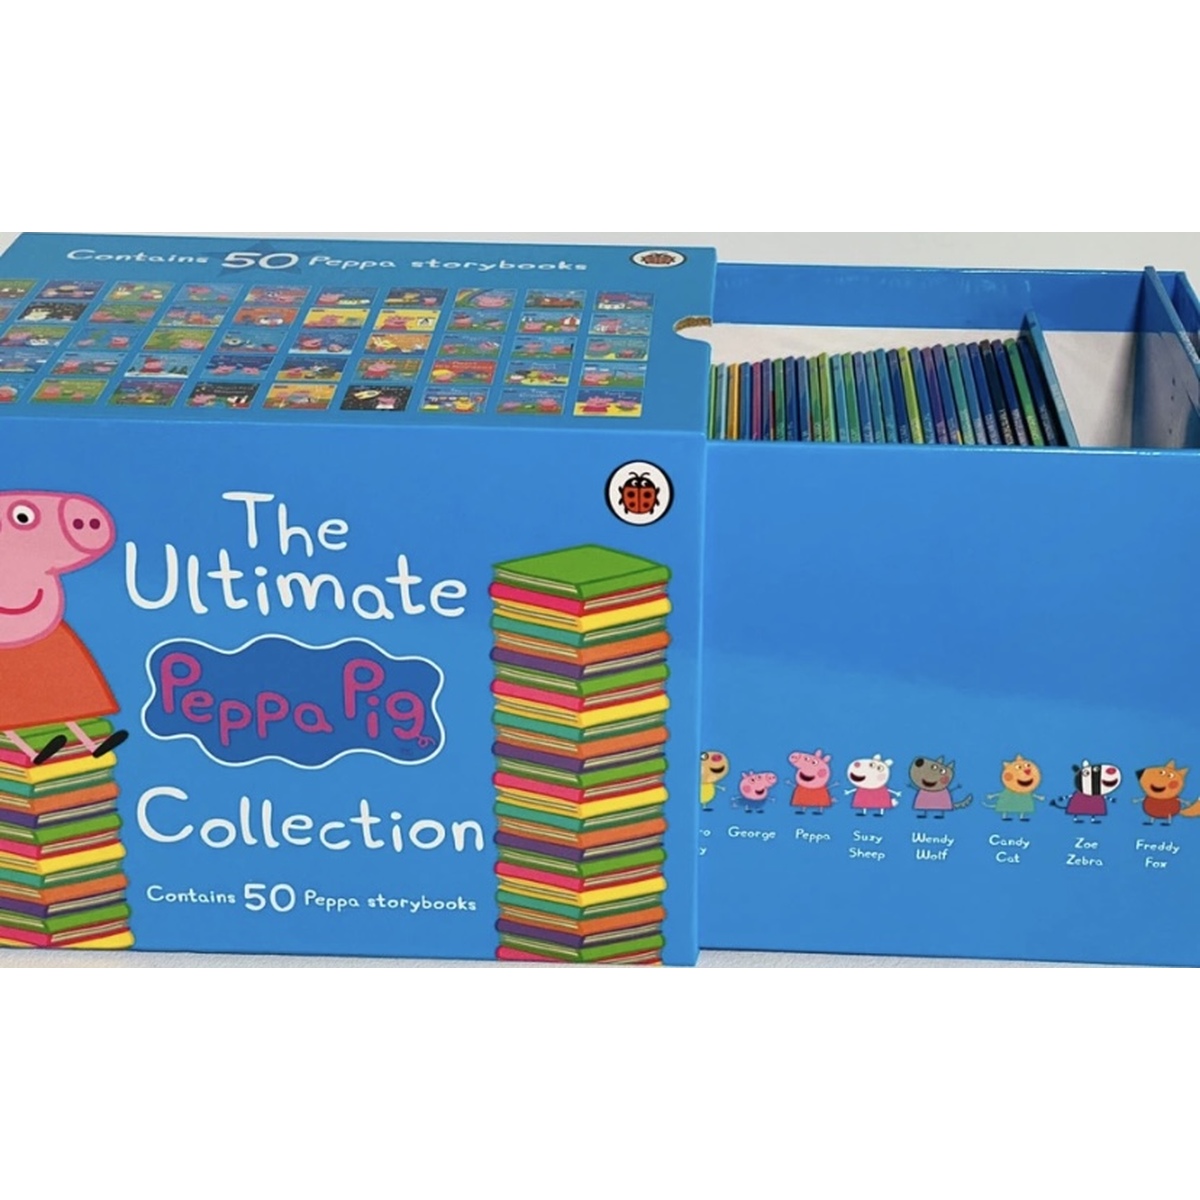 Peppa Pig 50 books Collection - Blue Box